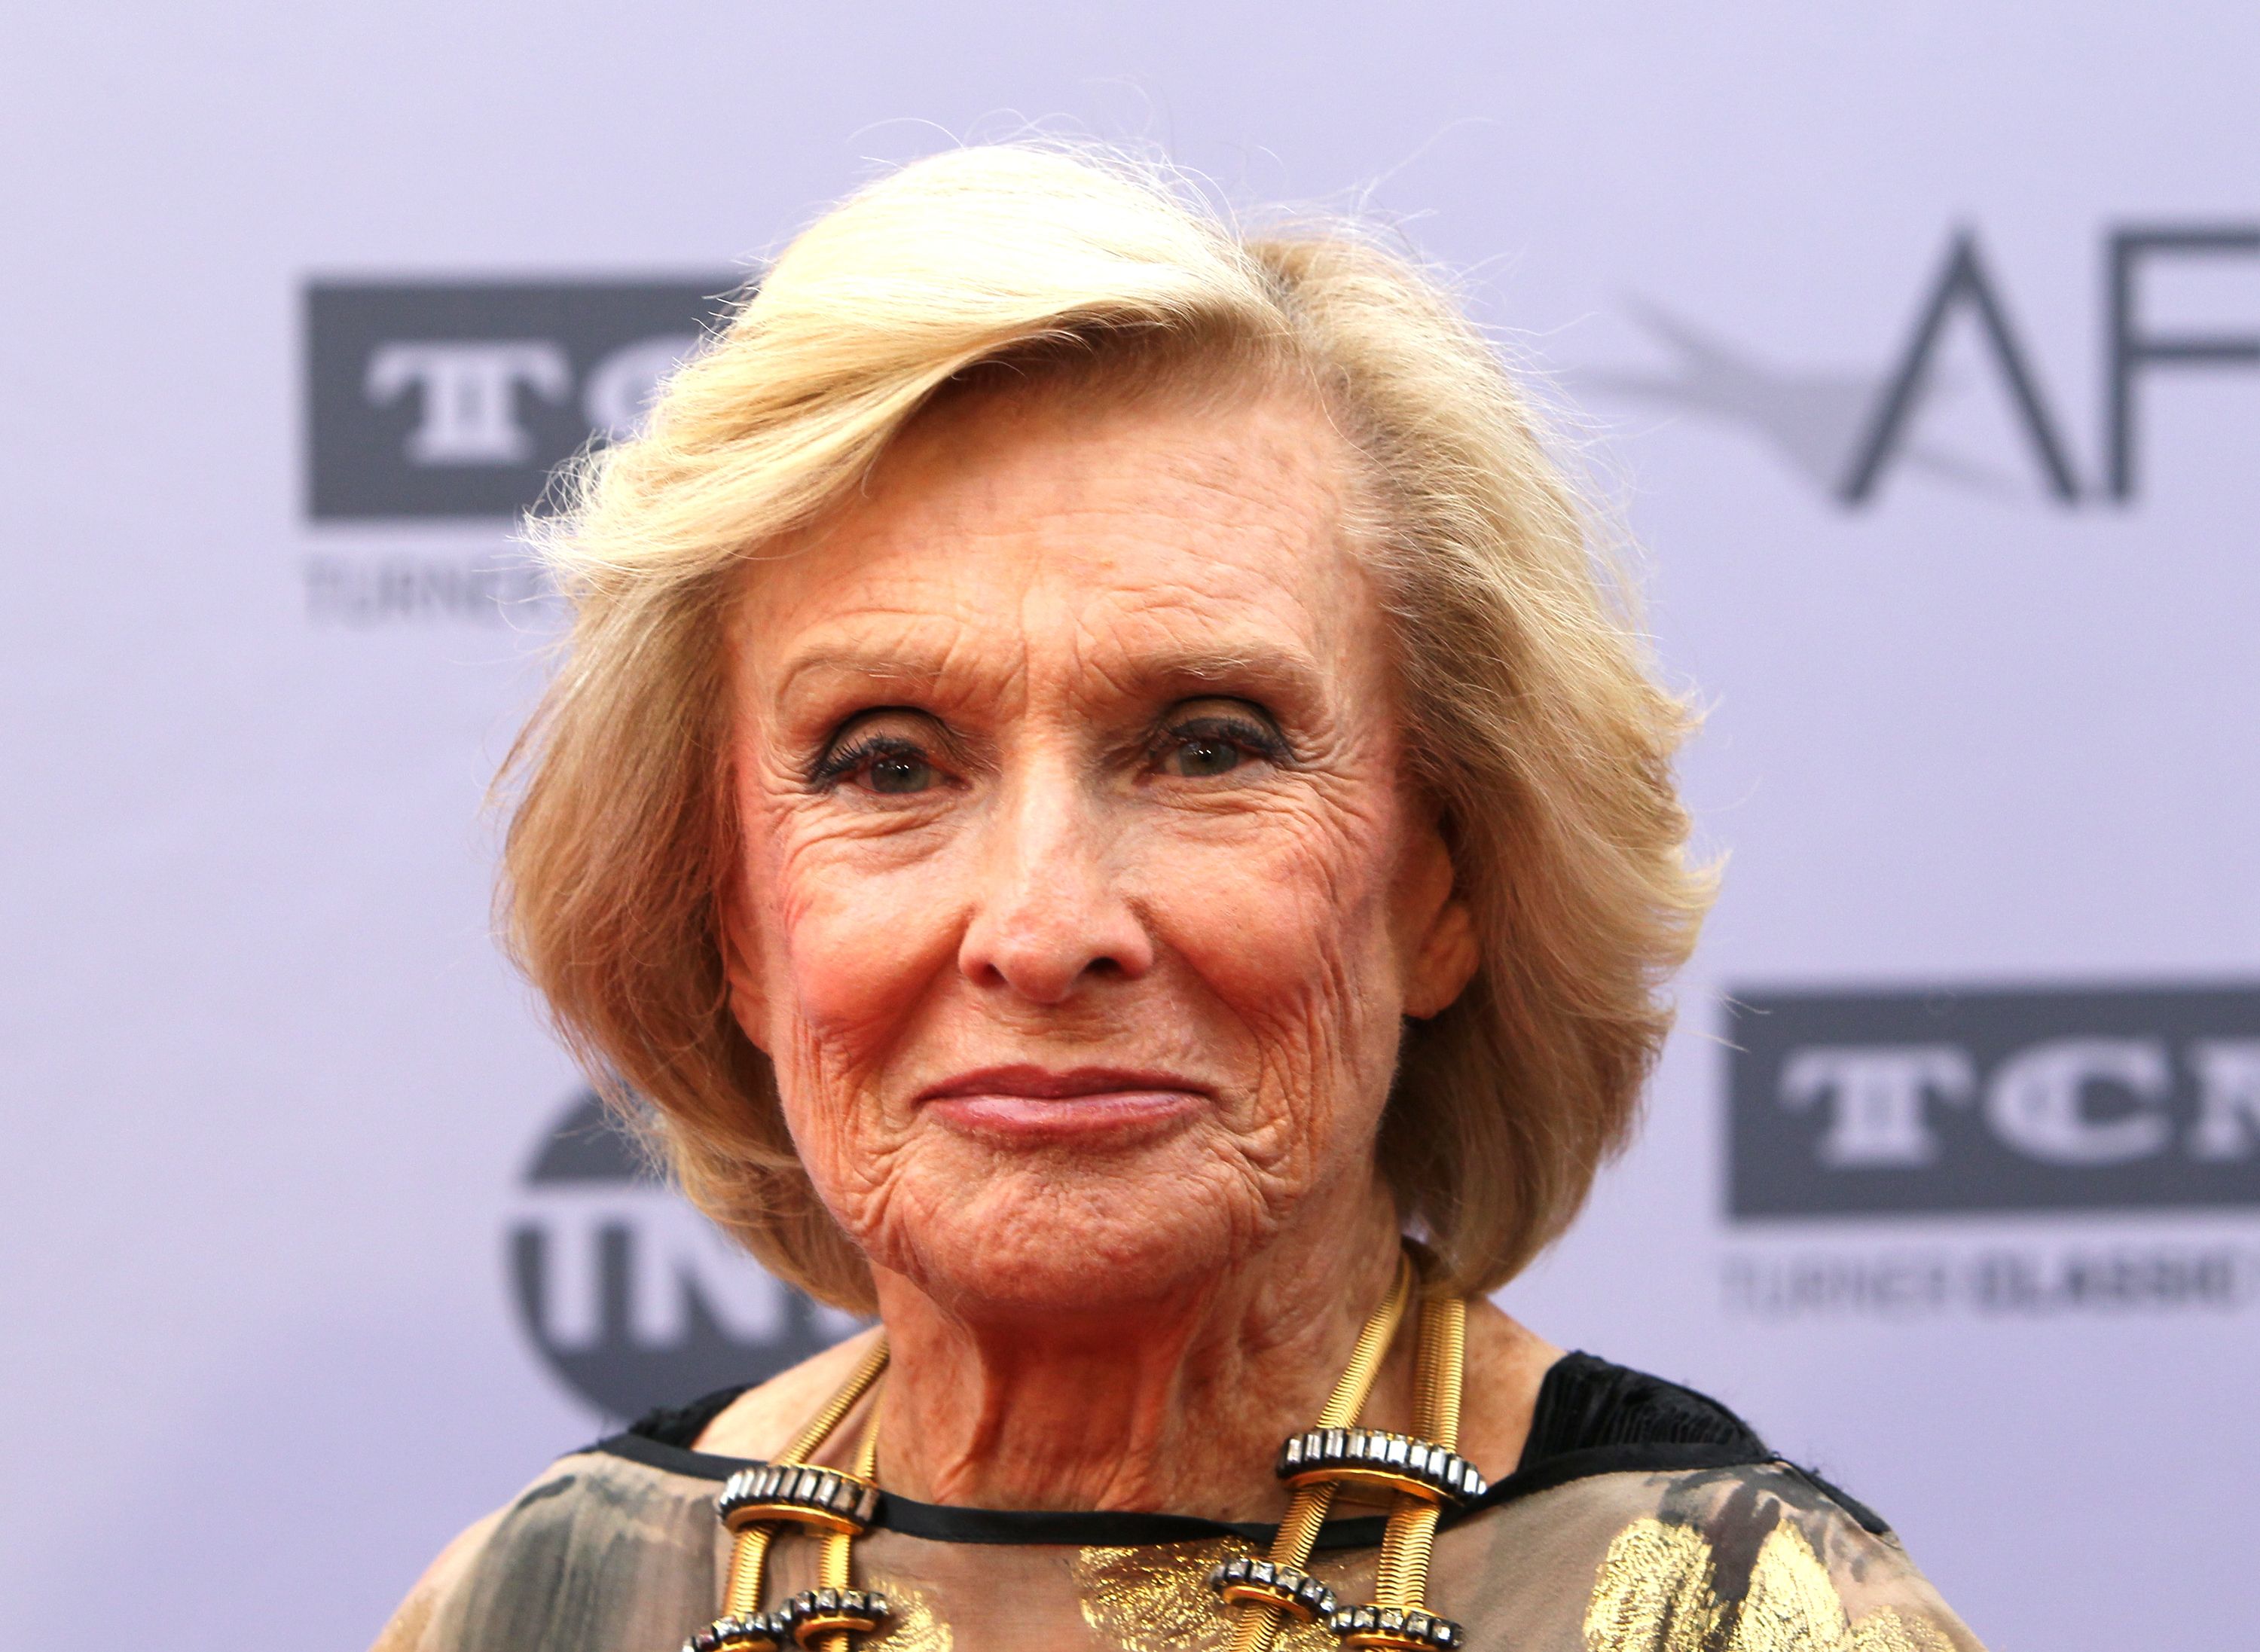 Cloris Leachman at the American Film Institute's 44th Life Achievement Award Gala Tribute to John Williams on June 9, 2016, in Hollywood, California | Photo: Getty Images